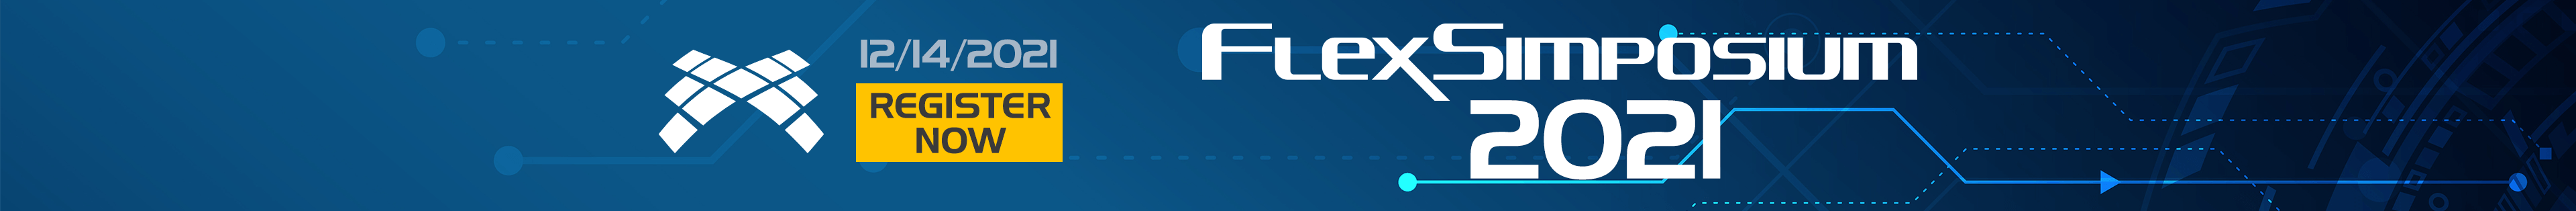 FlexSim: 3D Simulation Modeling and Analysis Software